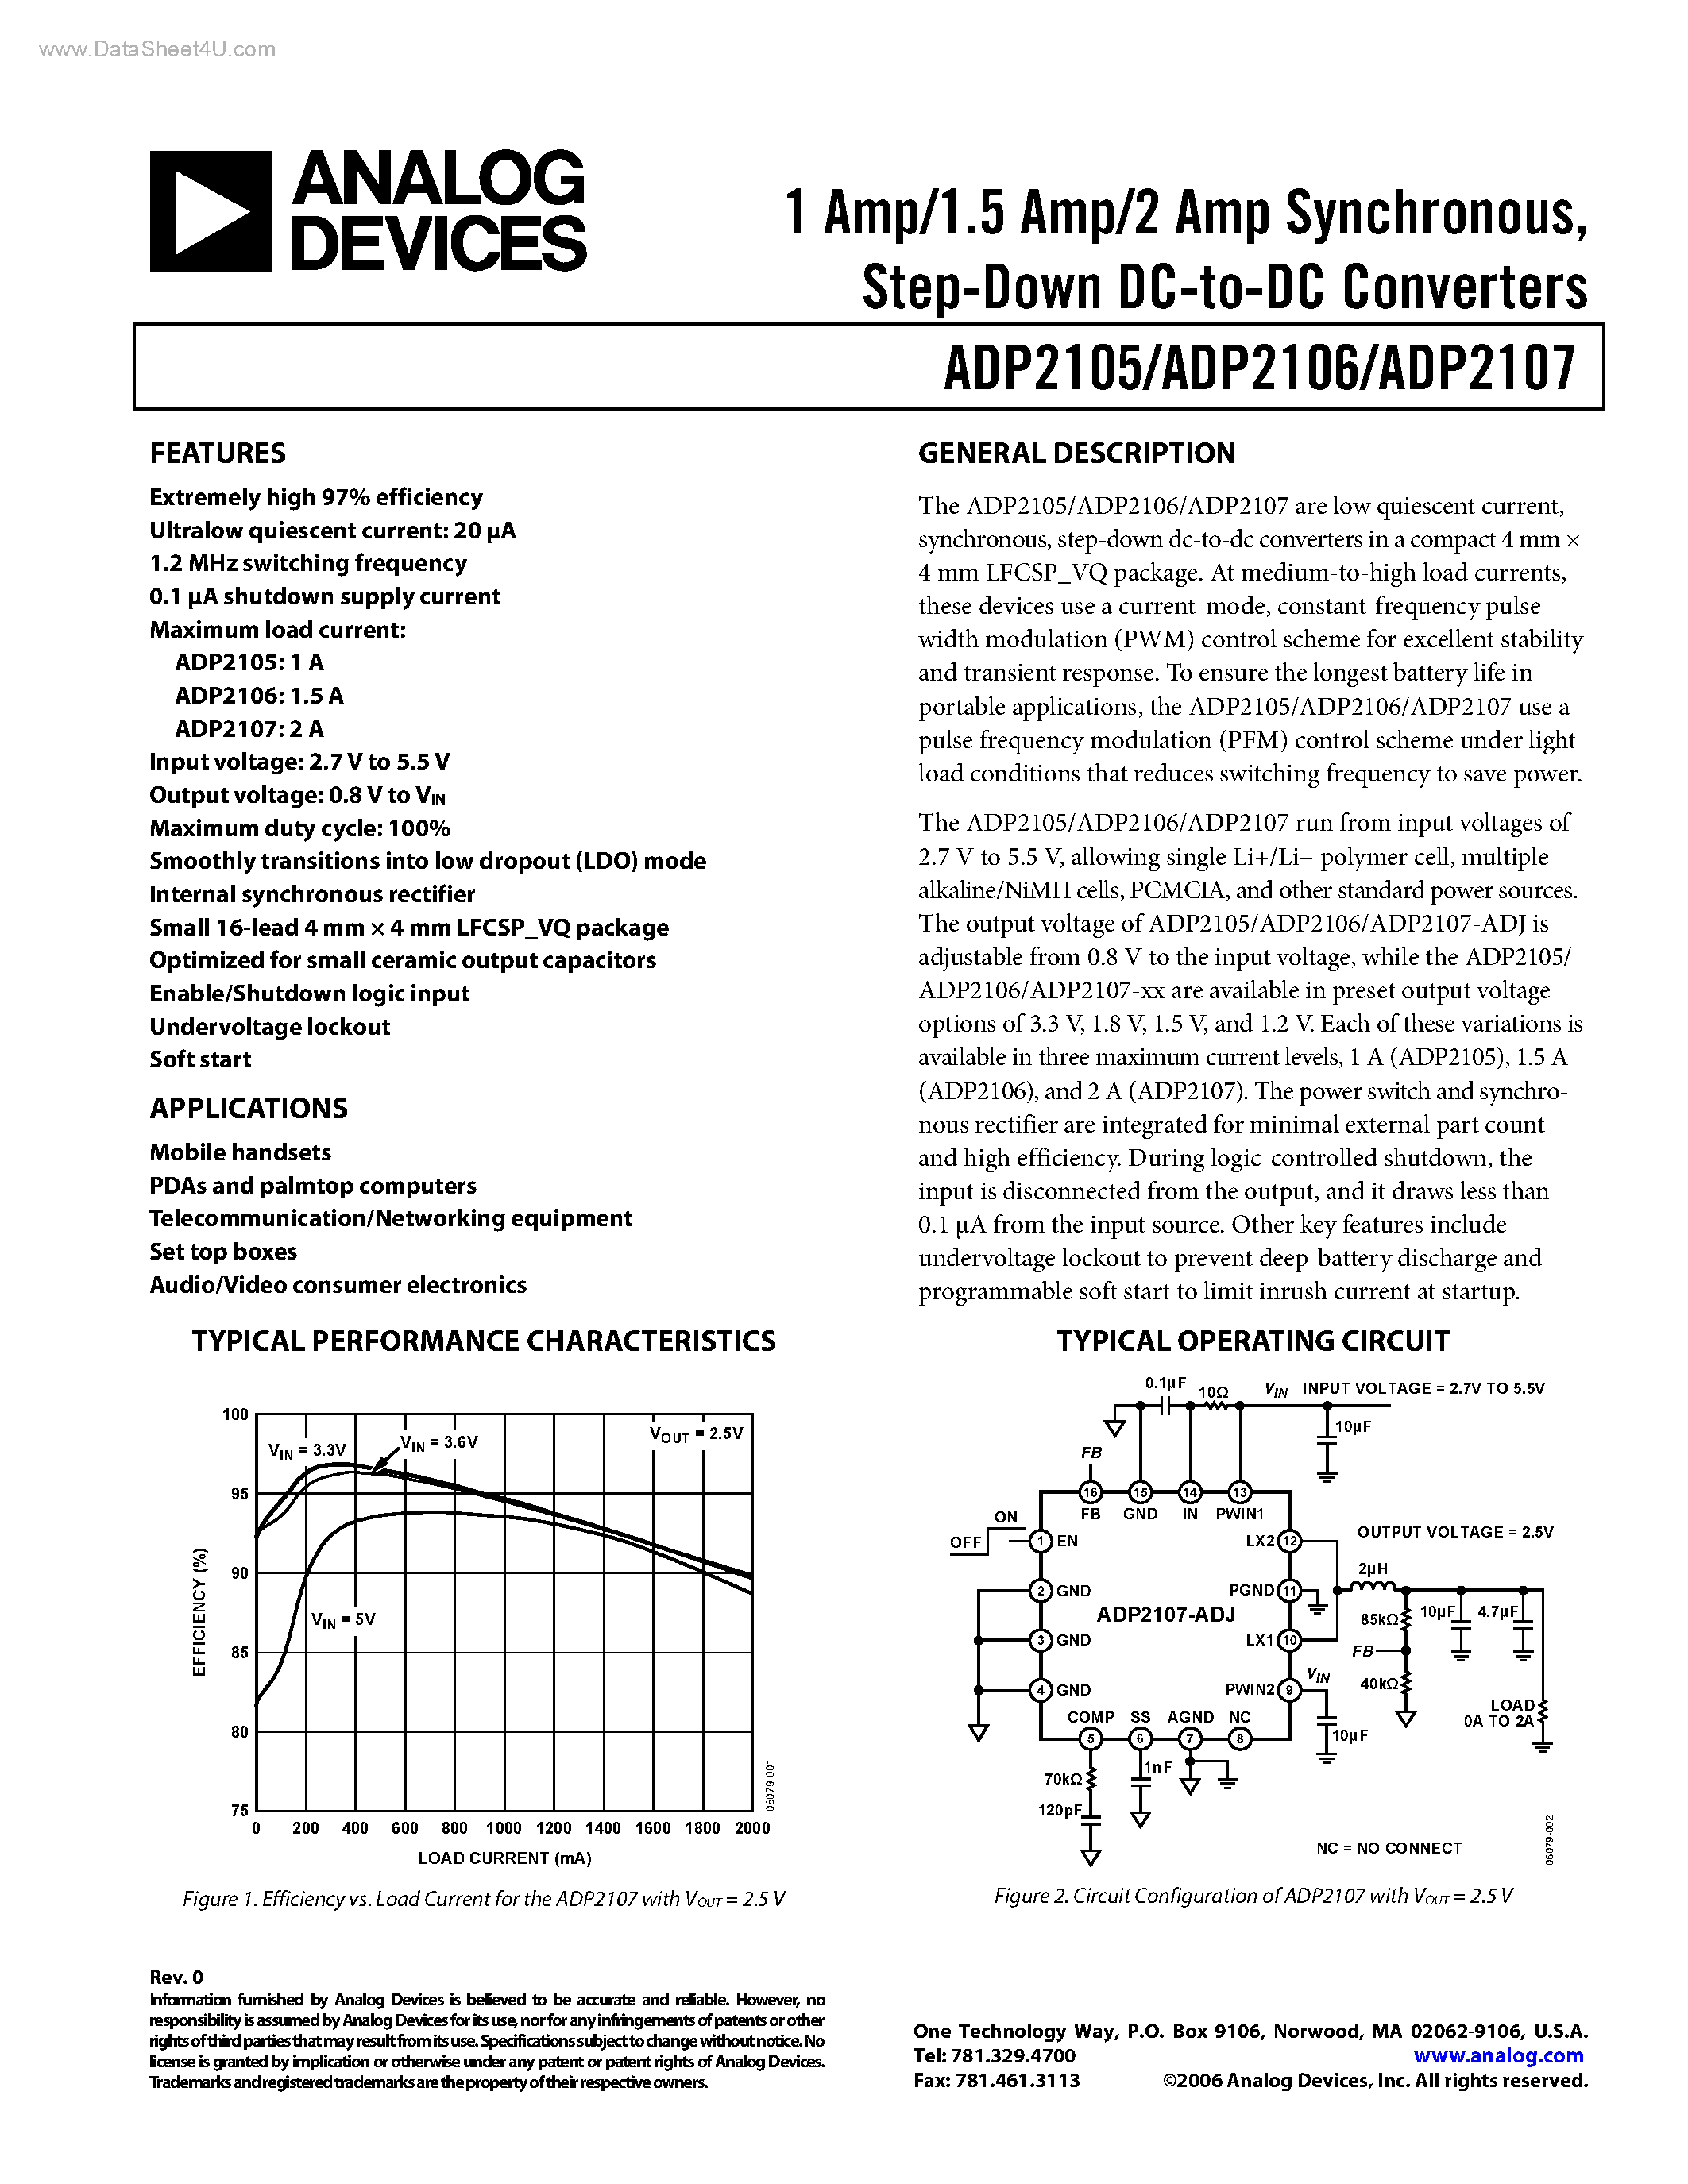 Datasheet ADP2105 - (ADP2105 - ADP2107) Step-Down DC-to-DC Converters page 1